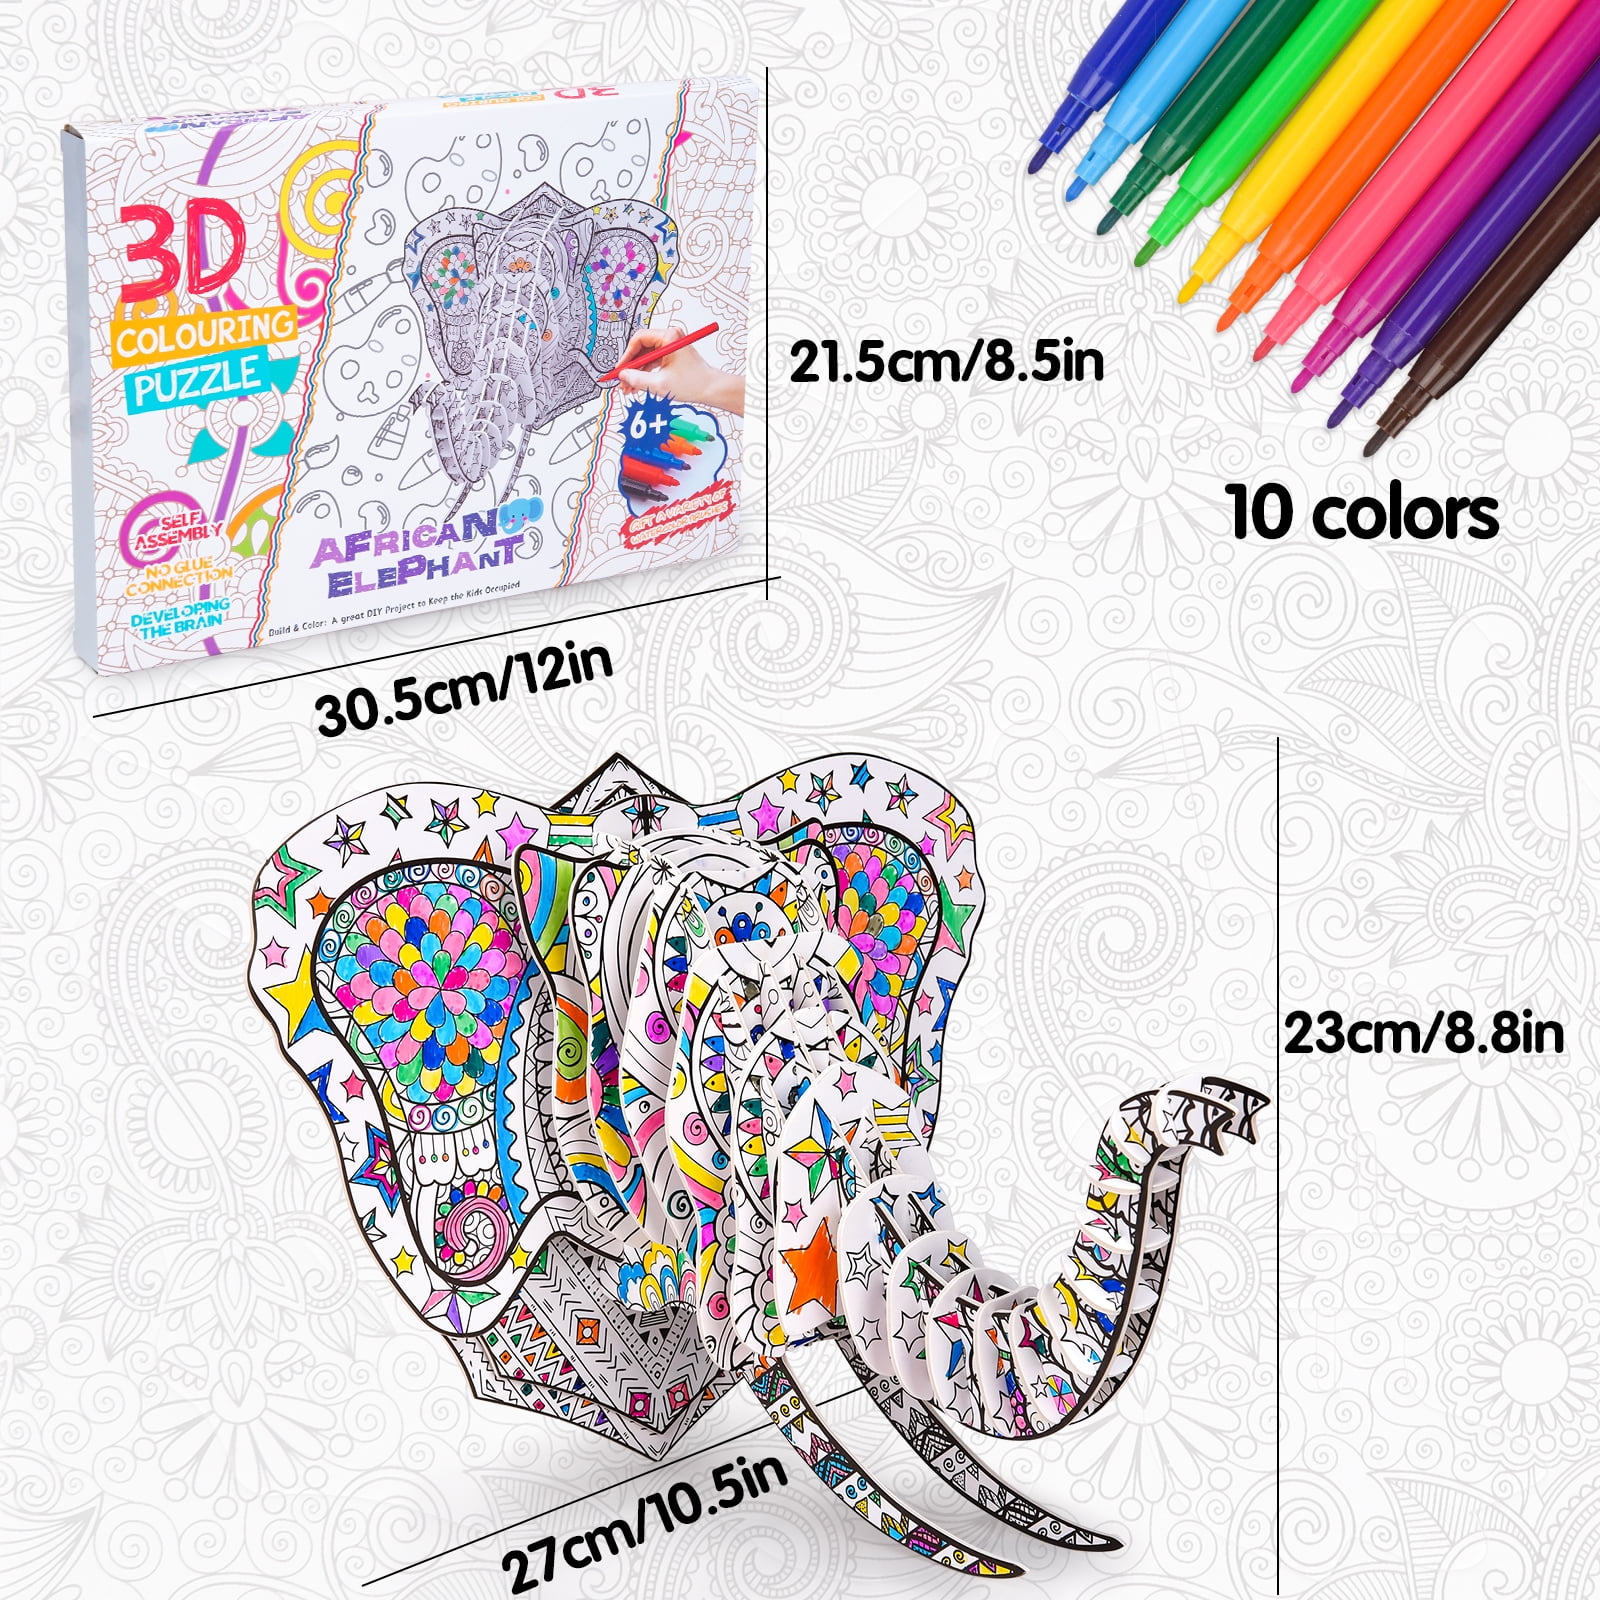 Hautton 3D Coloring Puzzle, Creative DIY Painting Puzzle Set Toy with 10 Colouring Pens, Fun Arts Crafts Gift for Kids Age 3 4 5